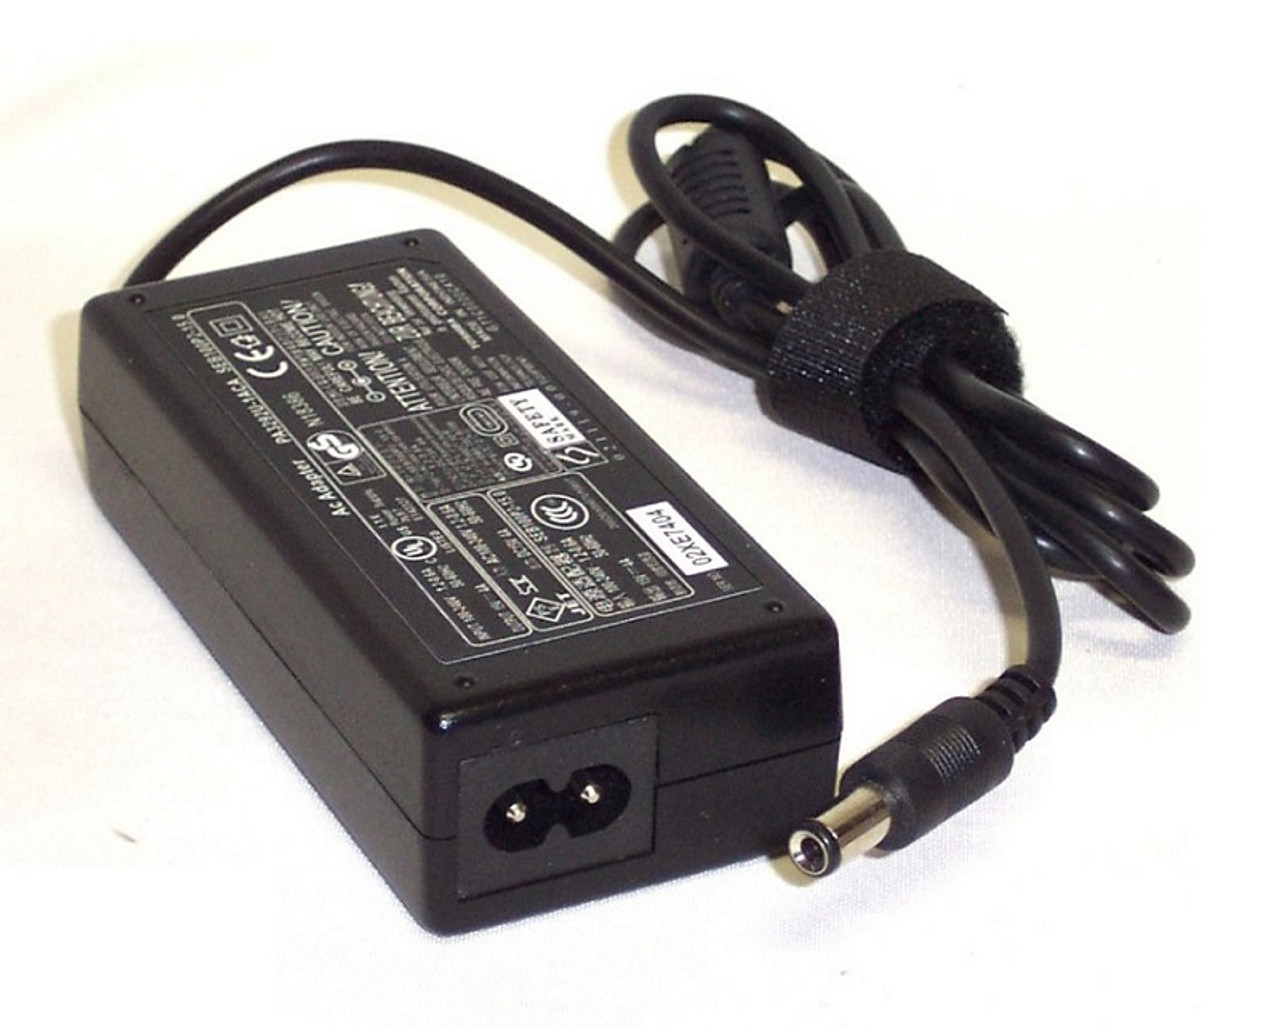 KT2MG - Dell 65-Watts AC Adapter for Dell Inspiron